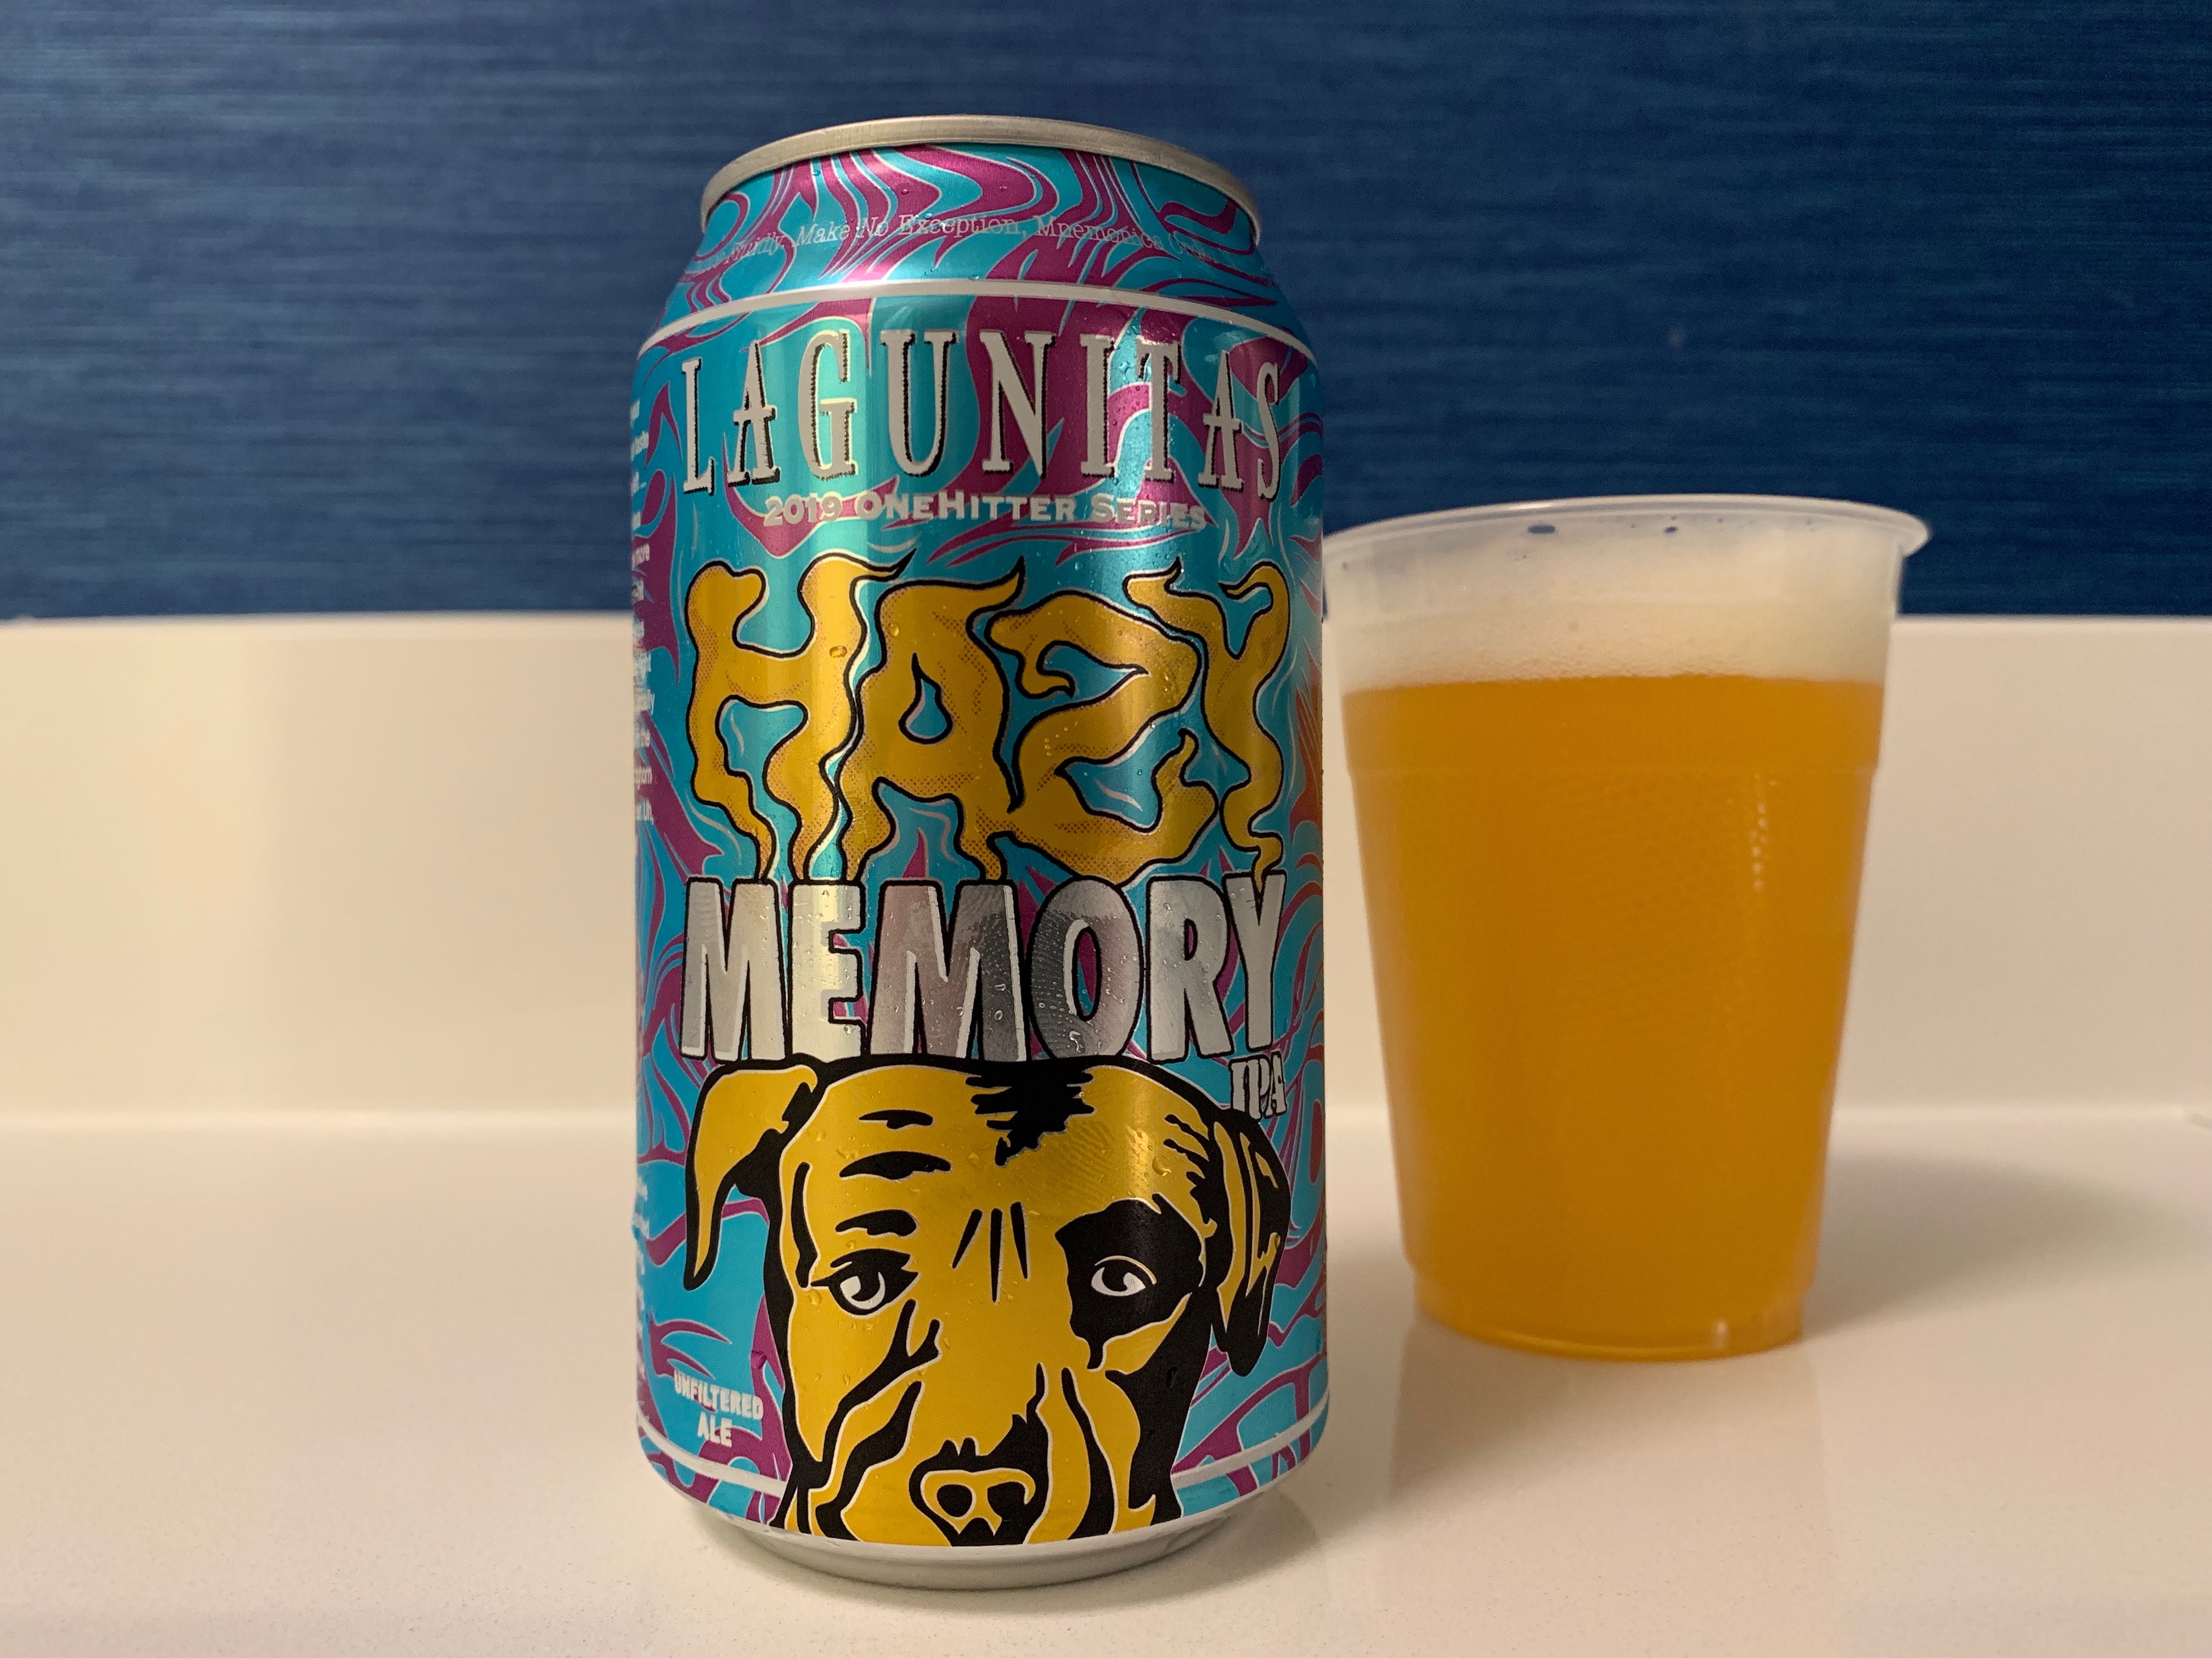 New to cans from Lagunitas is Hazy Memory IPA, a delicous unfiltered IPA.